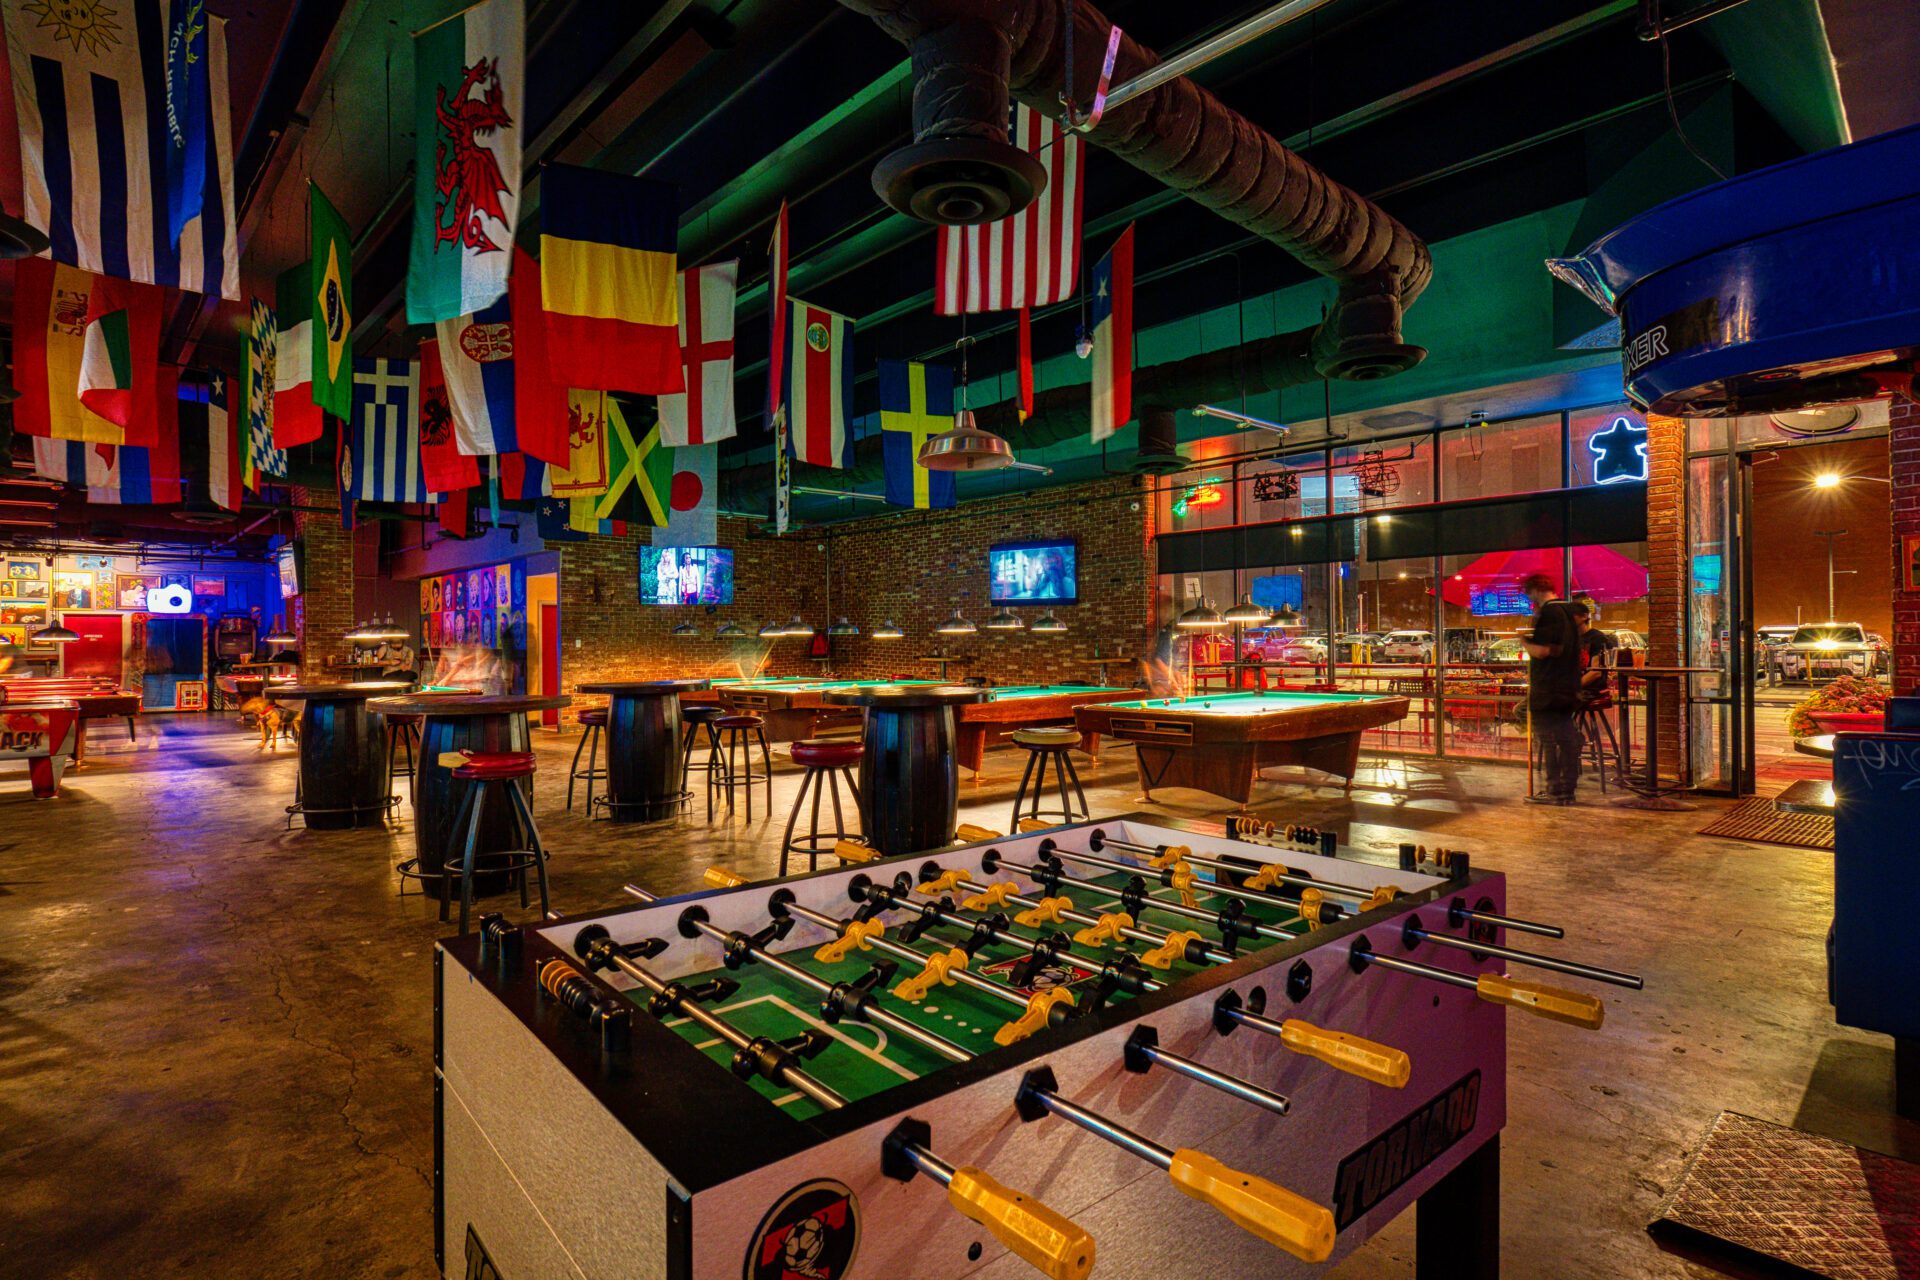 table hockey and billiard tables with flags from different countries